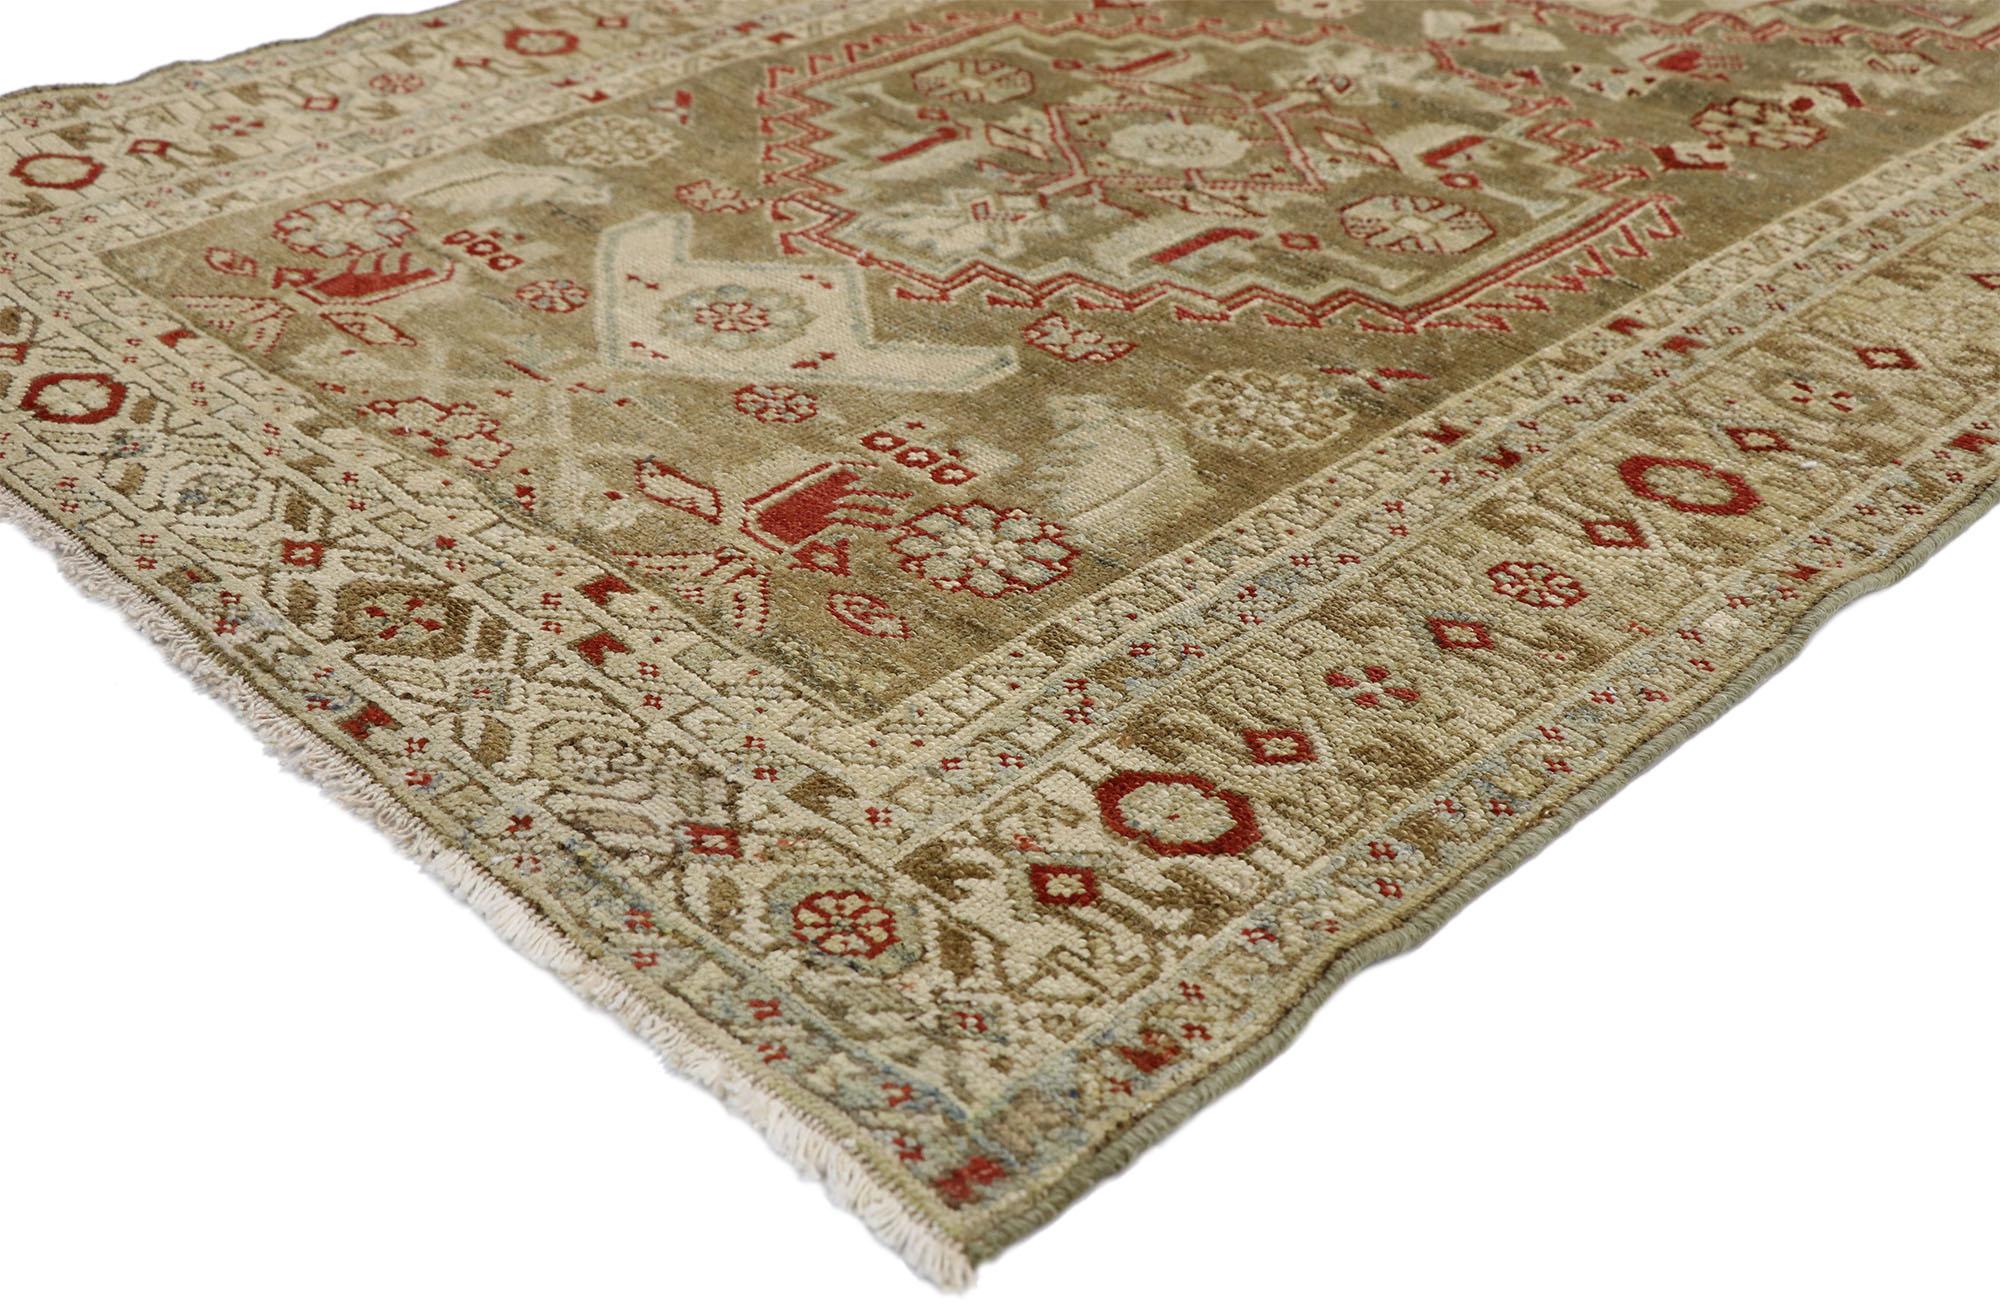 52627, distressed antique Persian Malayer design Runner with rustic Arts & Crafts style. With its stately character and weathered beauty combined with Arts & Crafts style, this hand knotted wool distressed antique Persian Malayer design runner